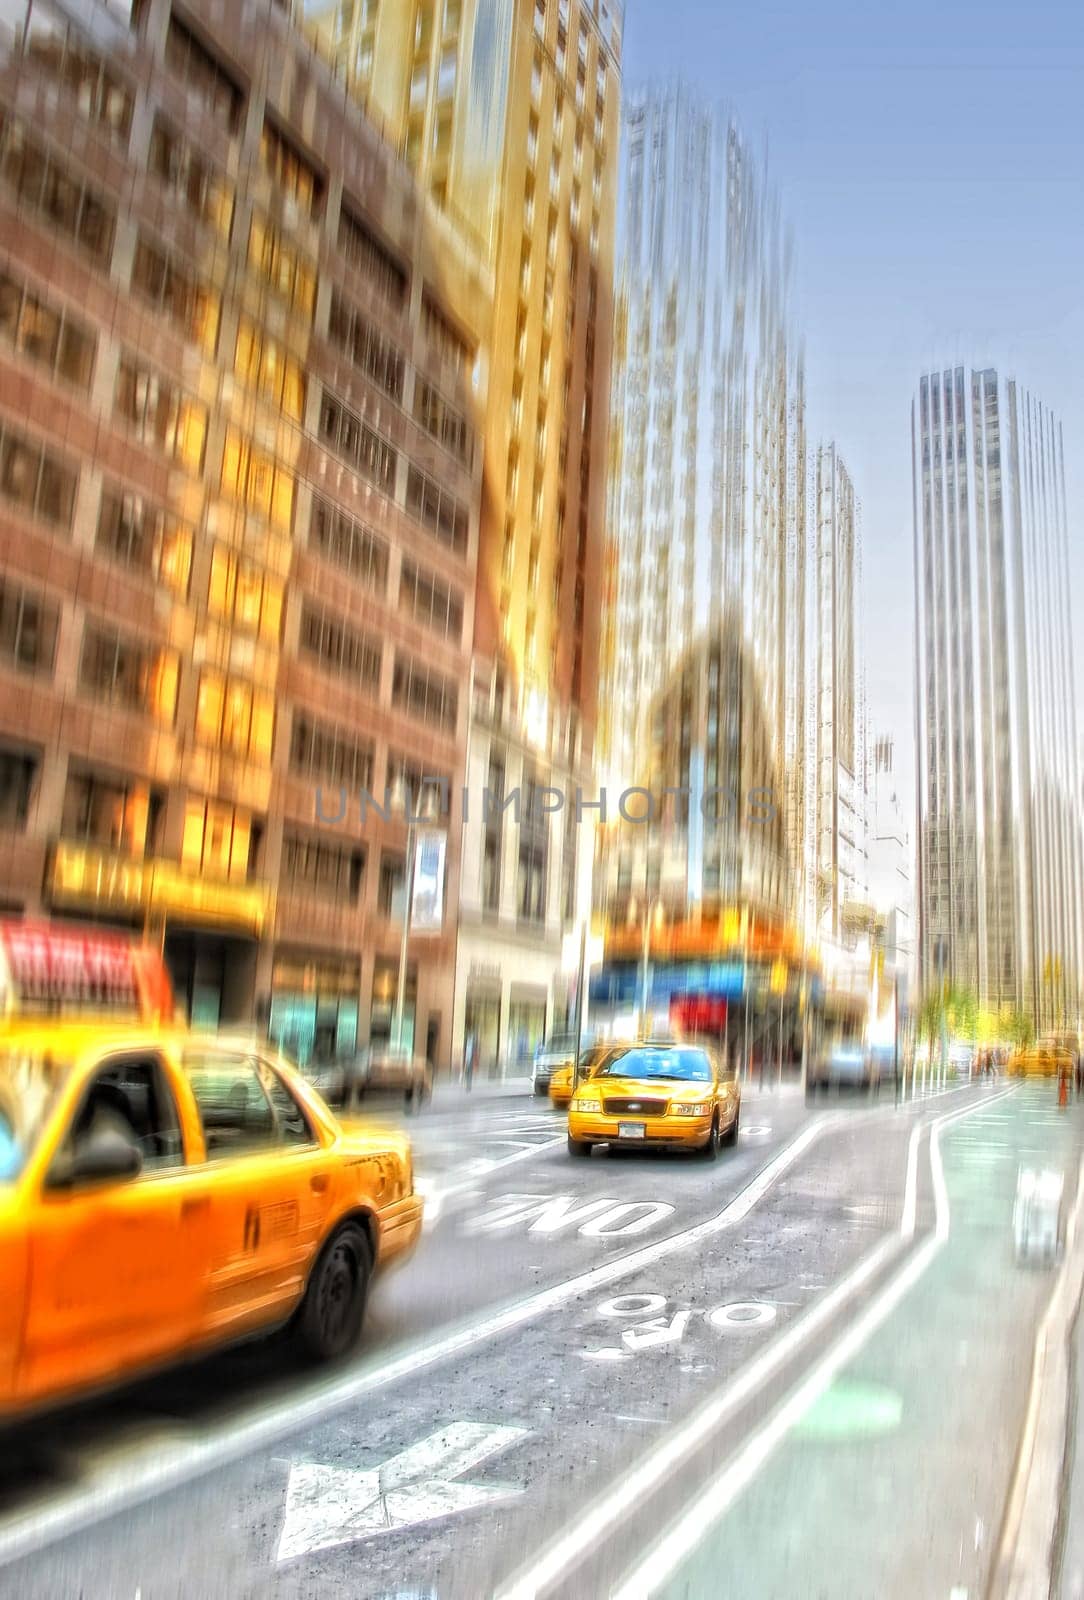 Street, city and blur of taxi, traffic and urban buildings outdoor in New York cityscape. Motion, town and road with car transport, architecture or infrastructure on landscape background in USA by YuriArcurs